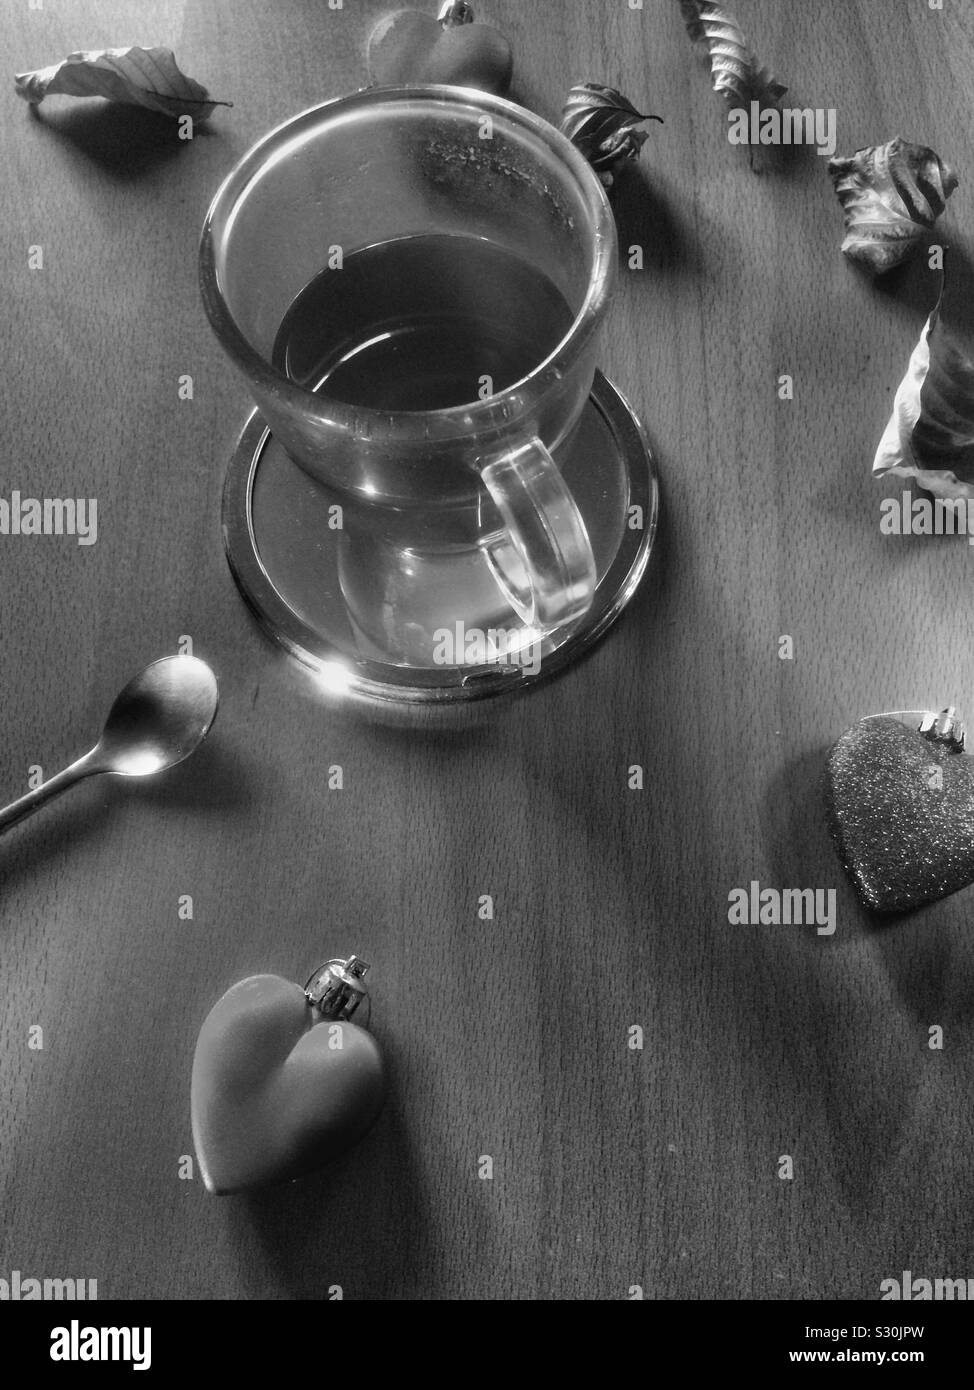 Cup of tea made of transparent glass with decorative hearts around and dried Autumn leaves. Stock Photo